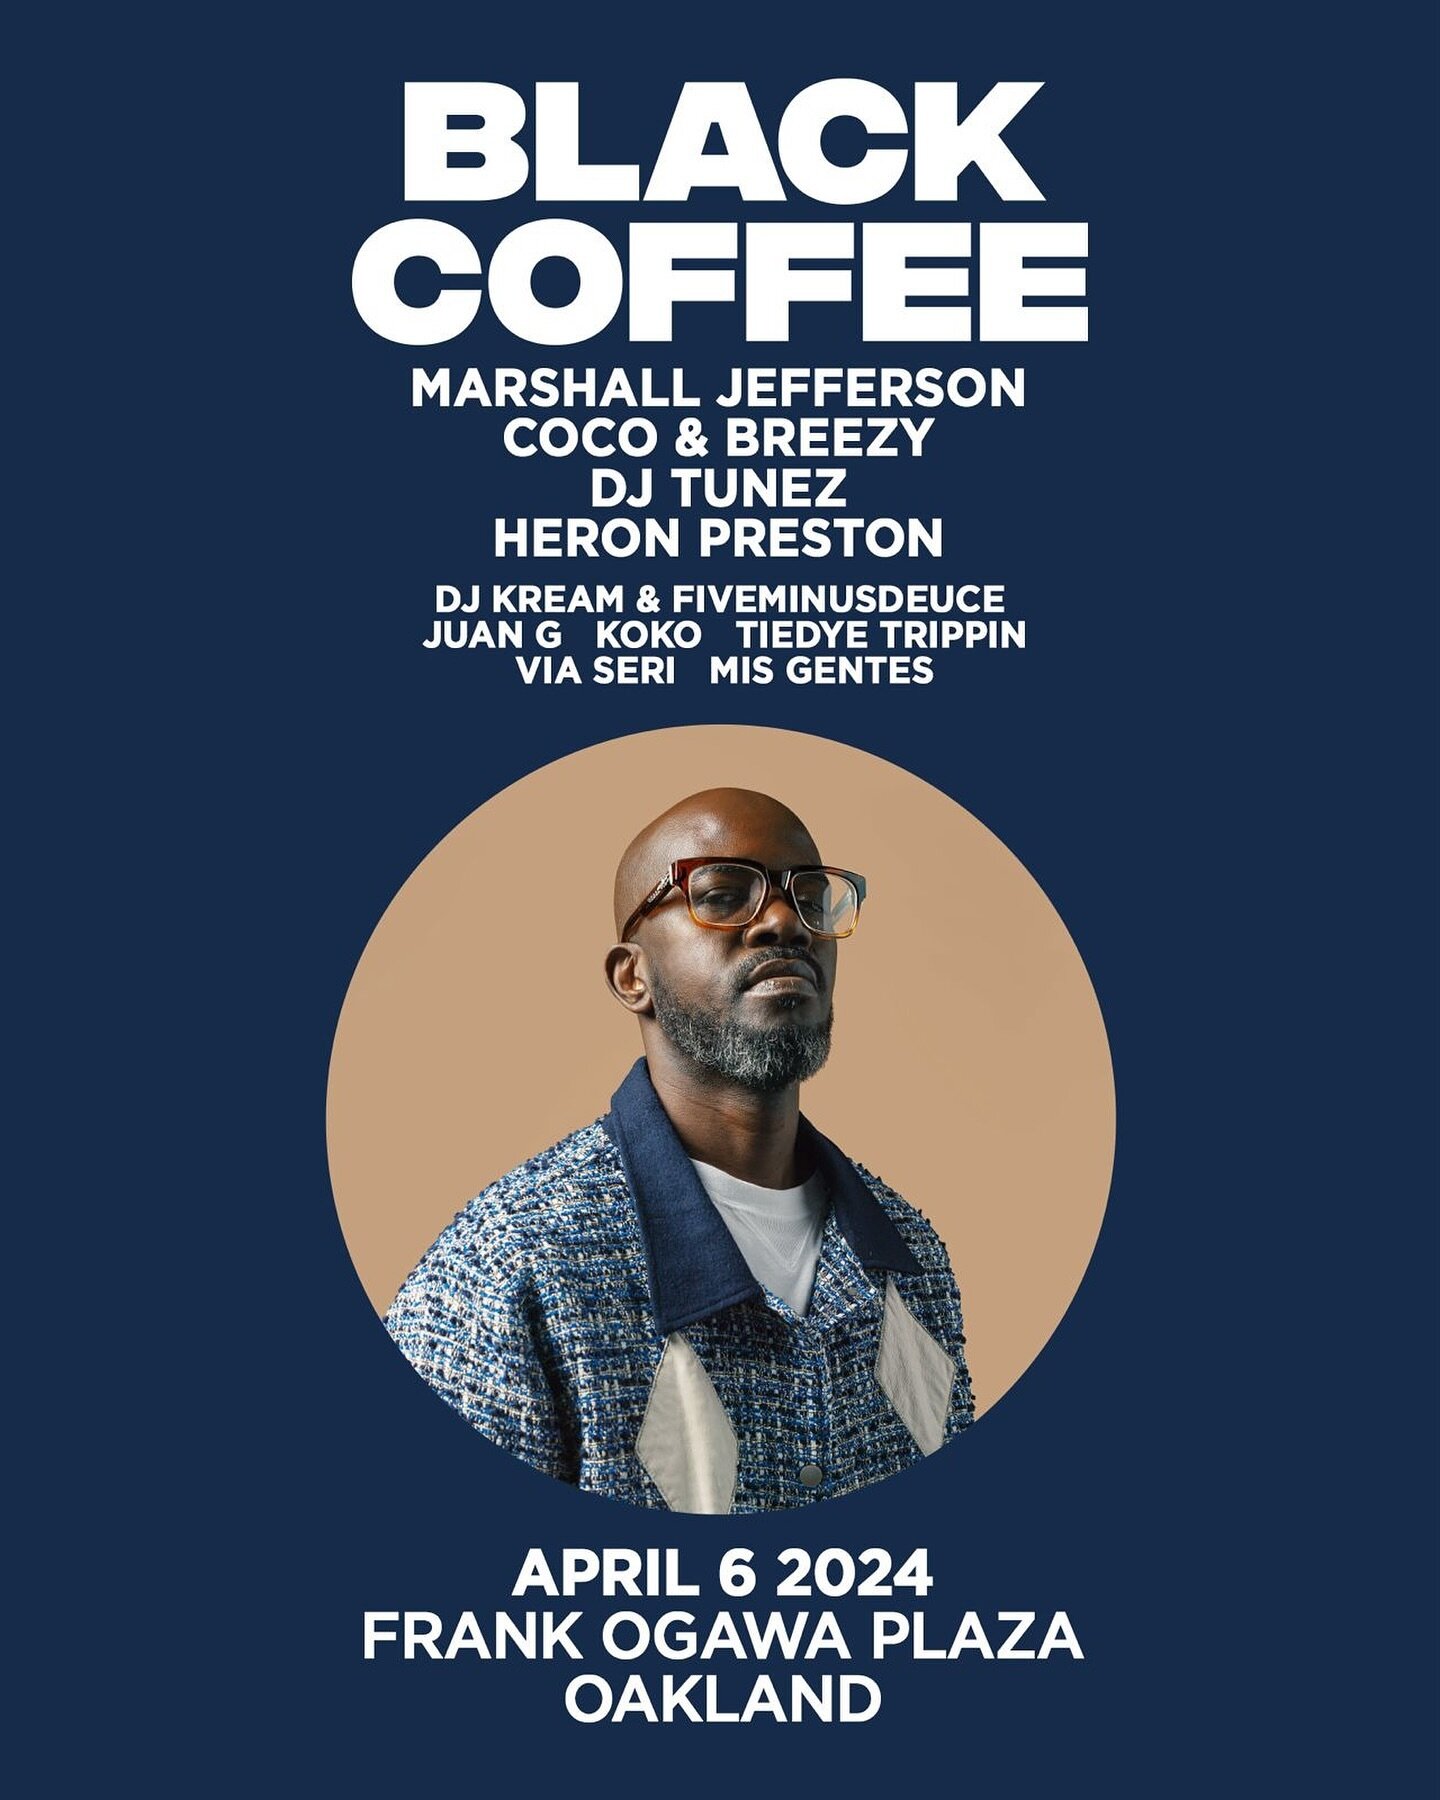 Join us for Black Coffee in Oakland happening now!

Get a special discount with code SAFRA10 for Black Coffee!

Visit: https://www.safraparties.com/upcoming-eventssf